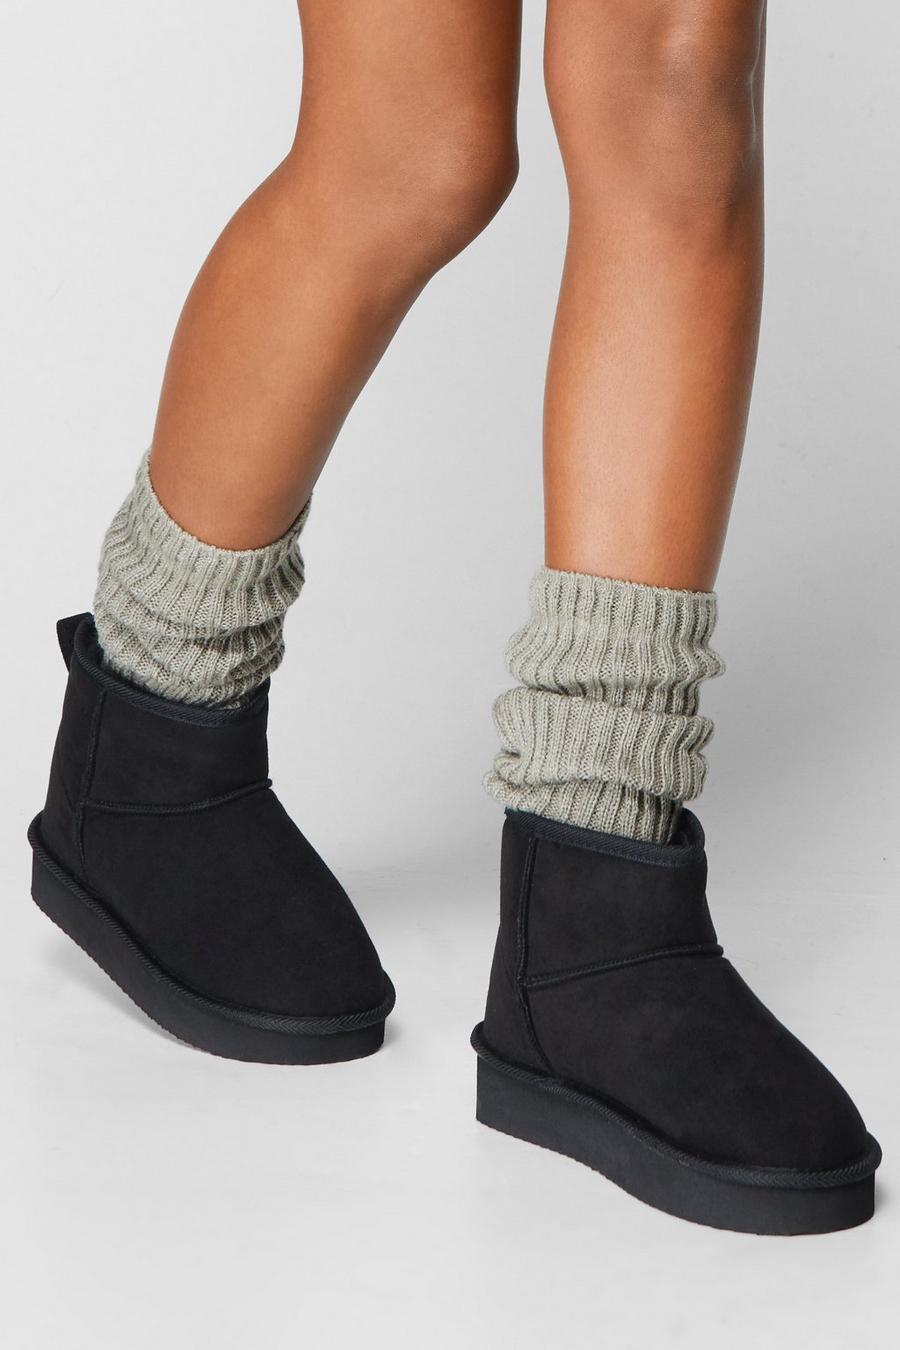 Women's Boots | Ankle Boots & Platform Boots | Nasty Gal